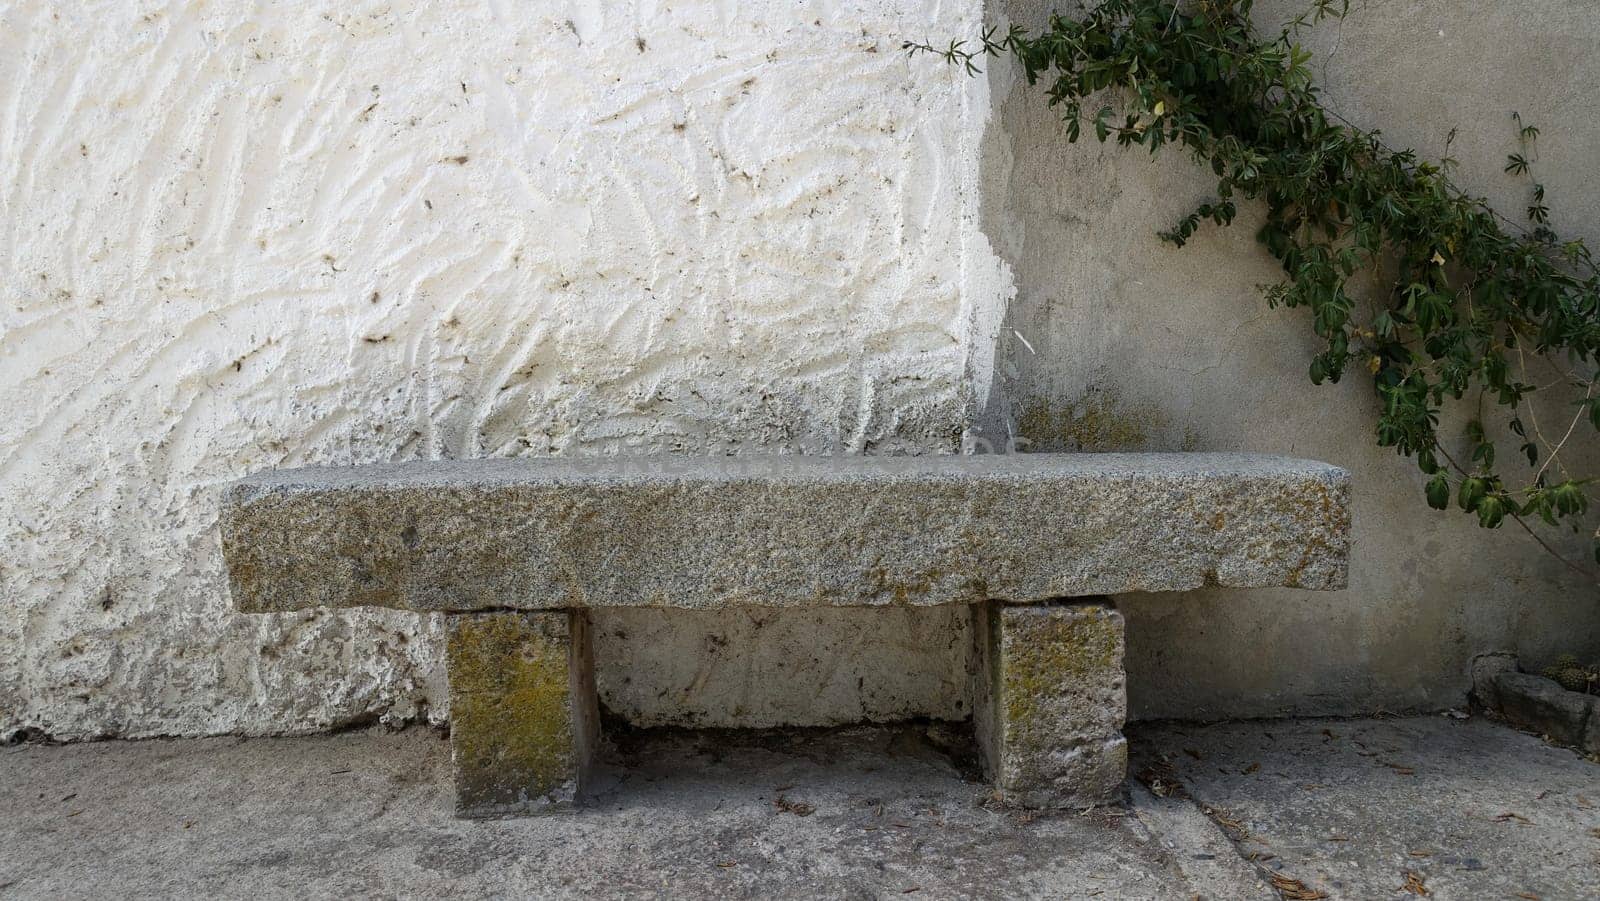 A lgranite bench along the wall of an old abandoned house. by Jamaladeen